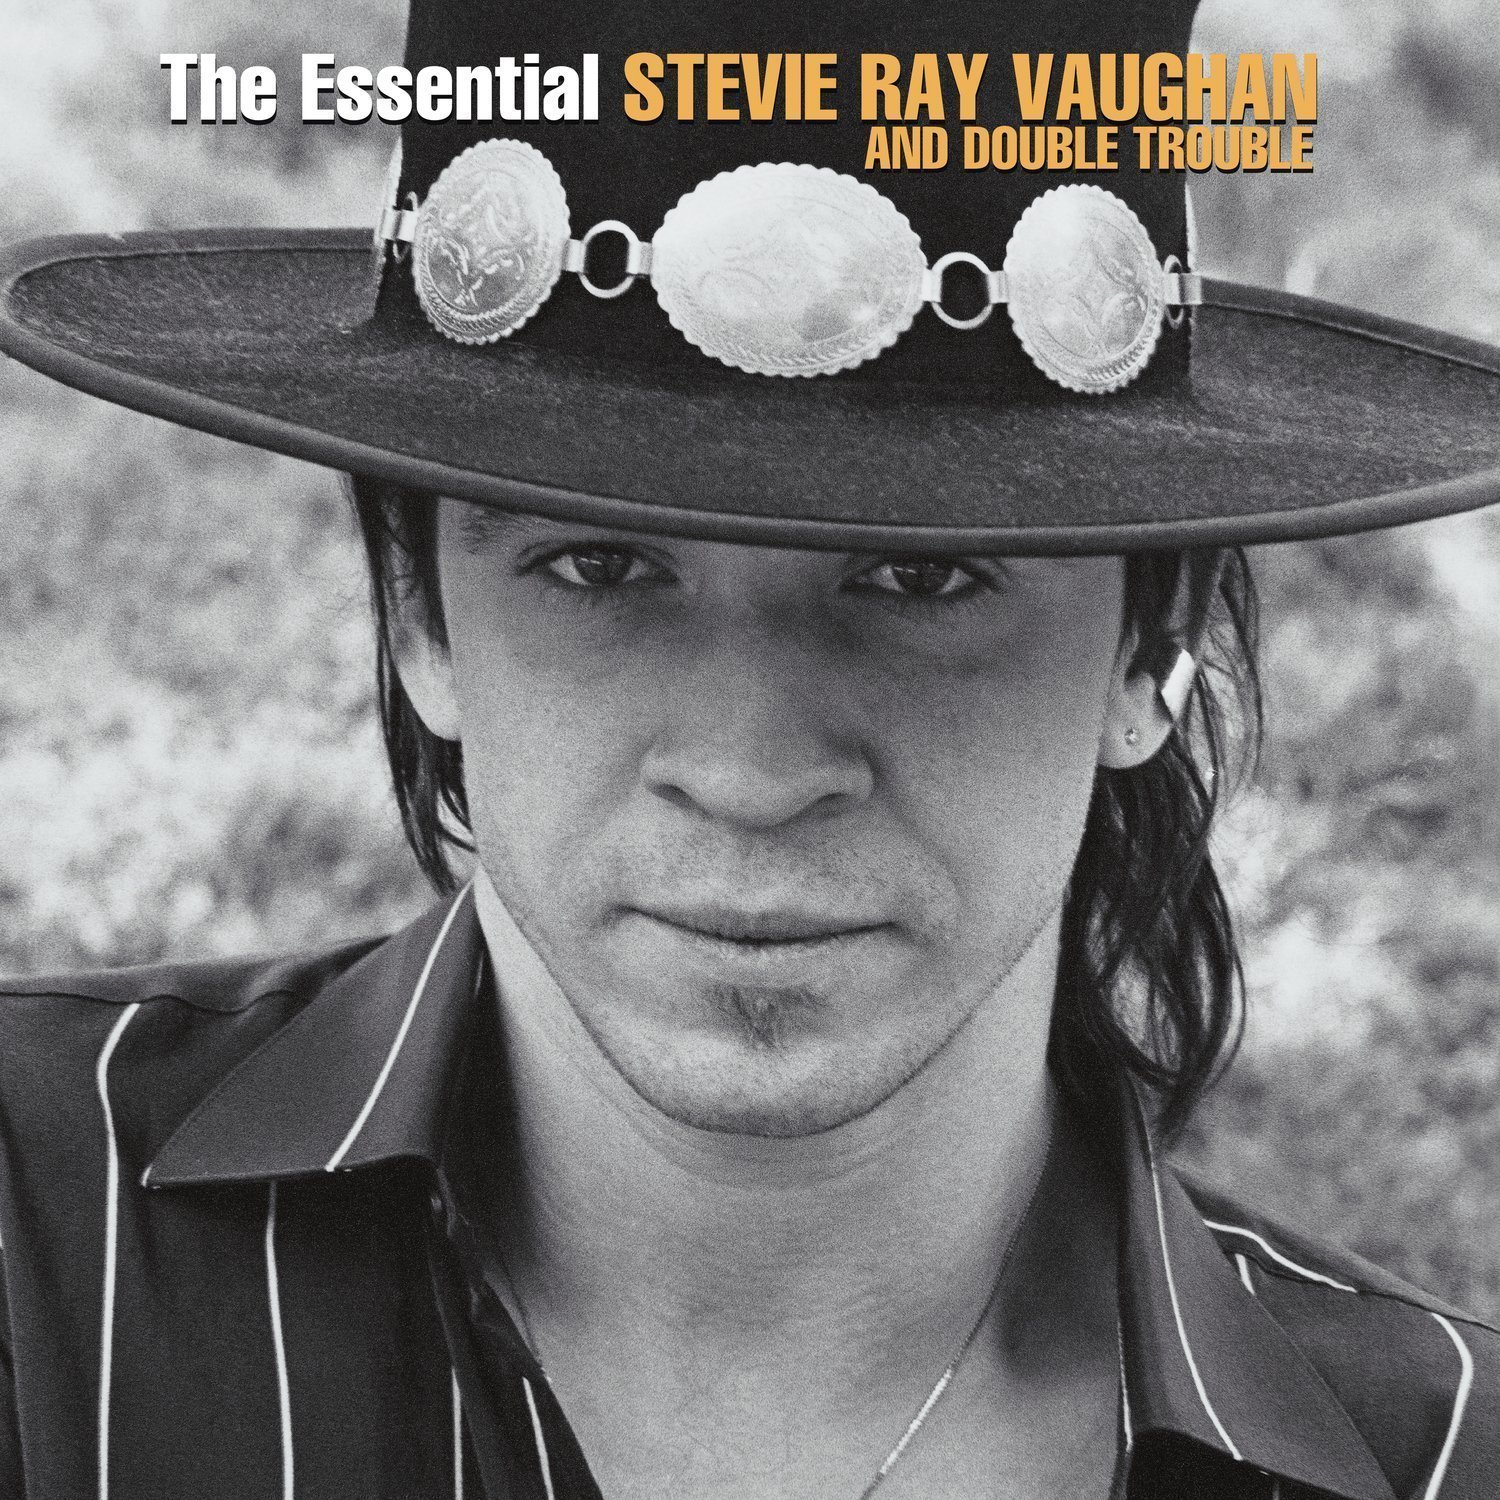 Disque vinyle Stevie Ray Vaughan Essential Stevie Ray Vaughan & Double Trouble (2 LP)